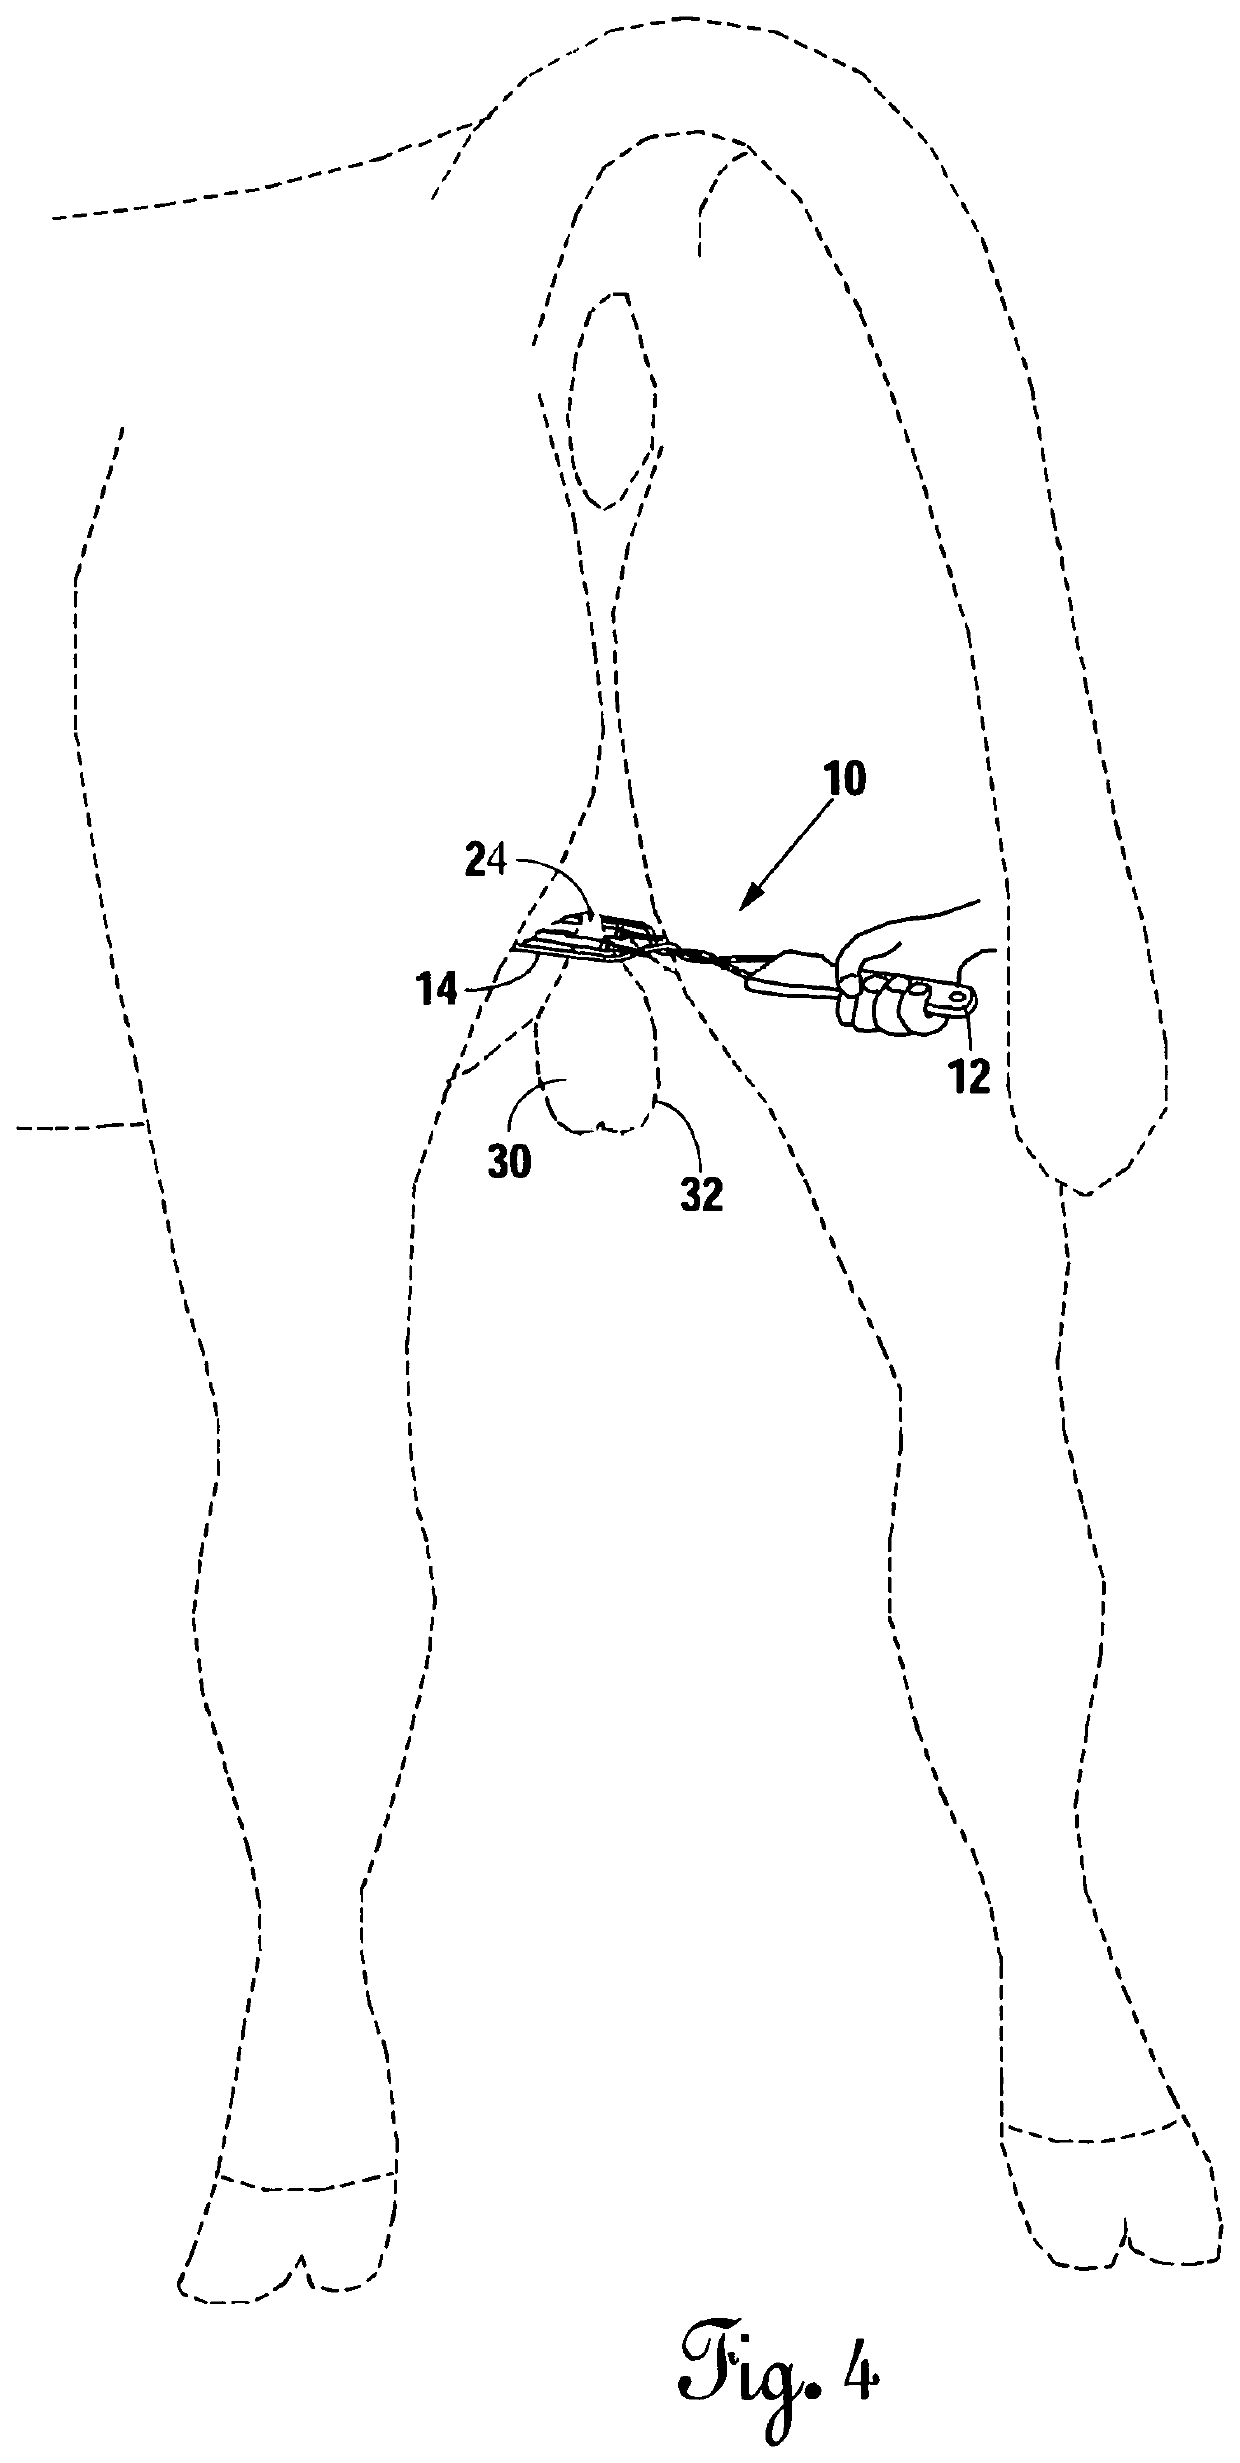 Device and method for mitigating the ascension of testicles during castration of livestock